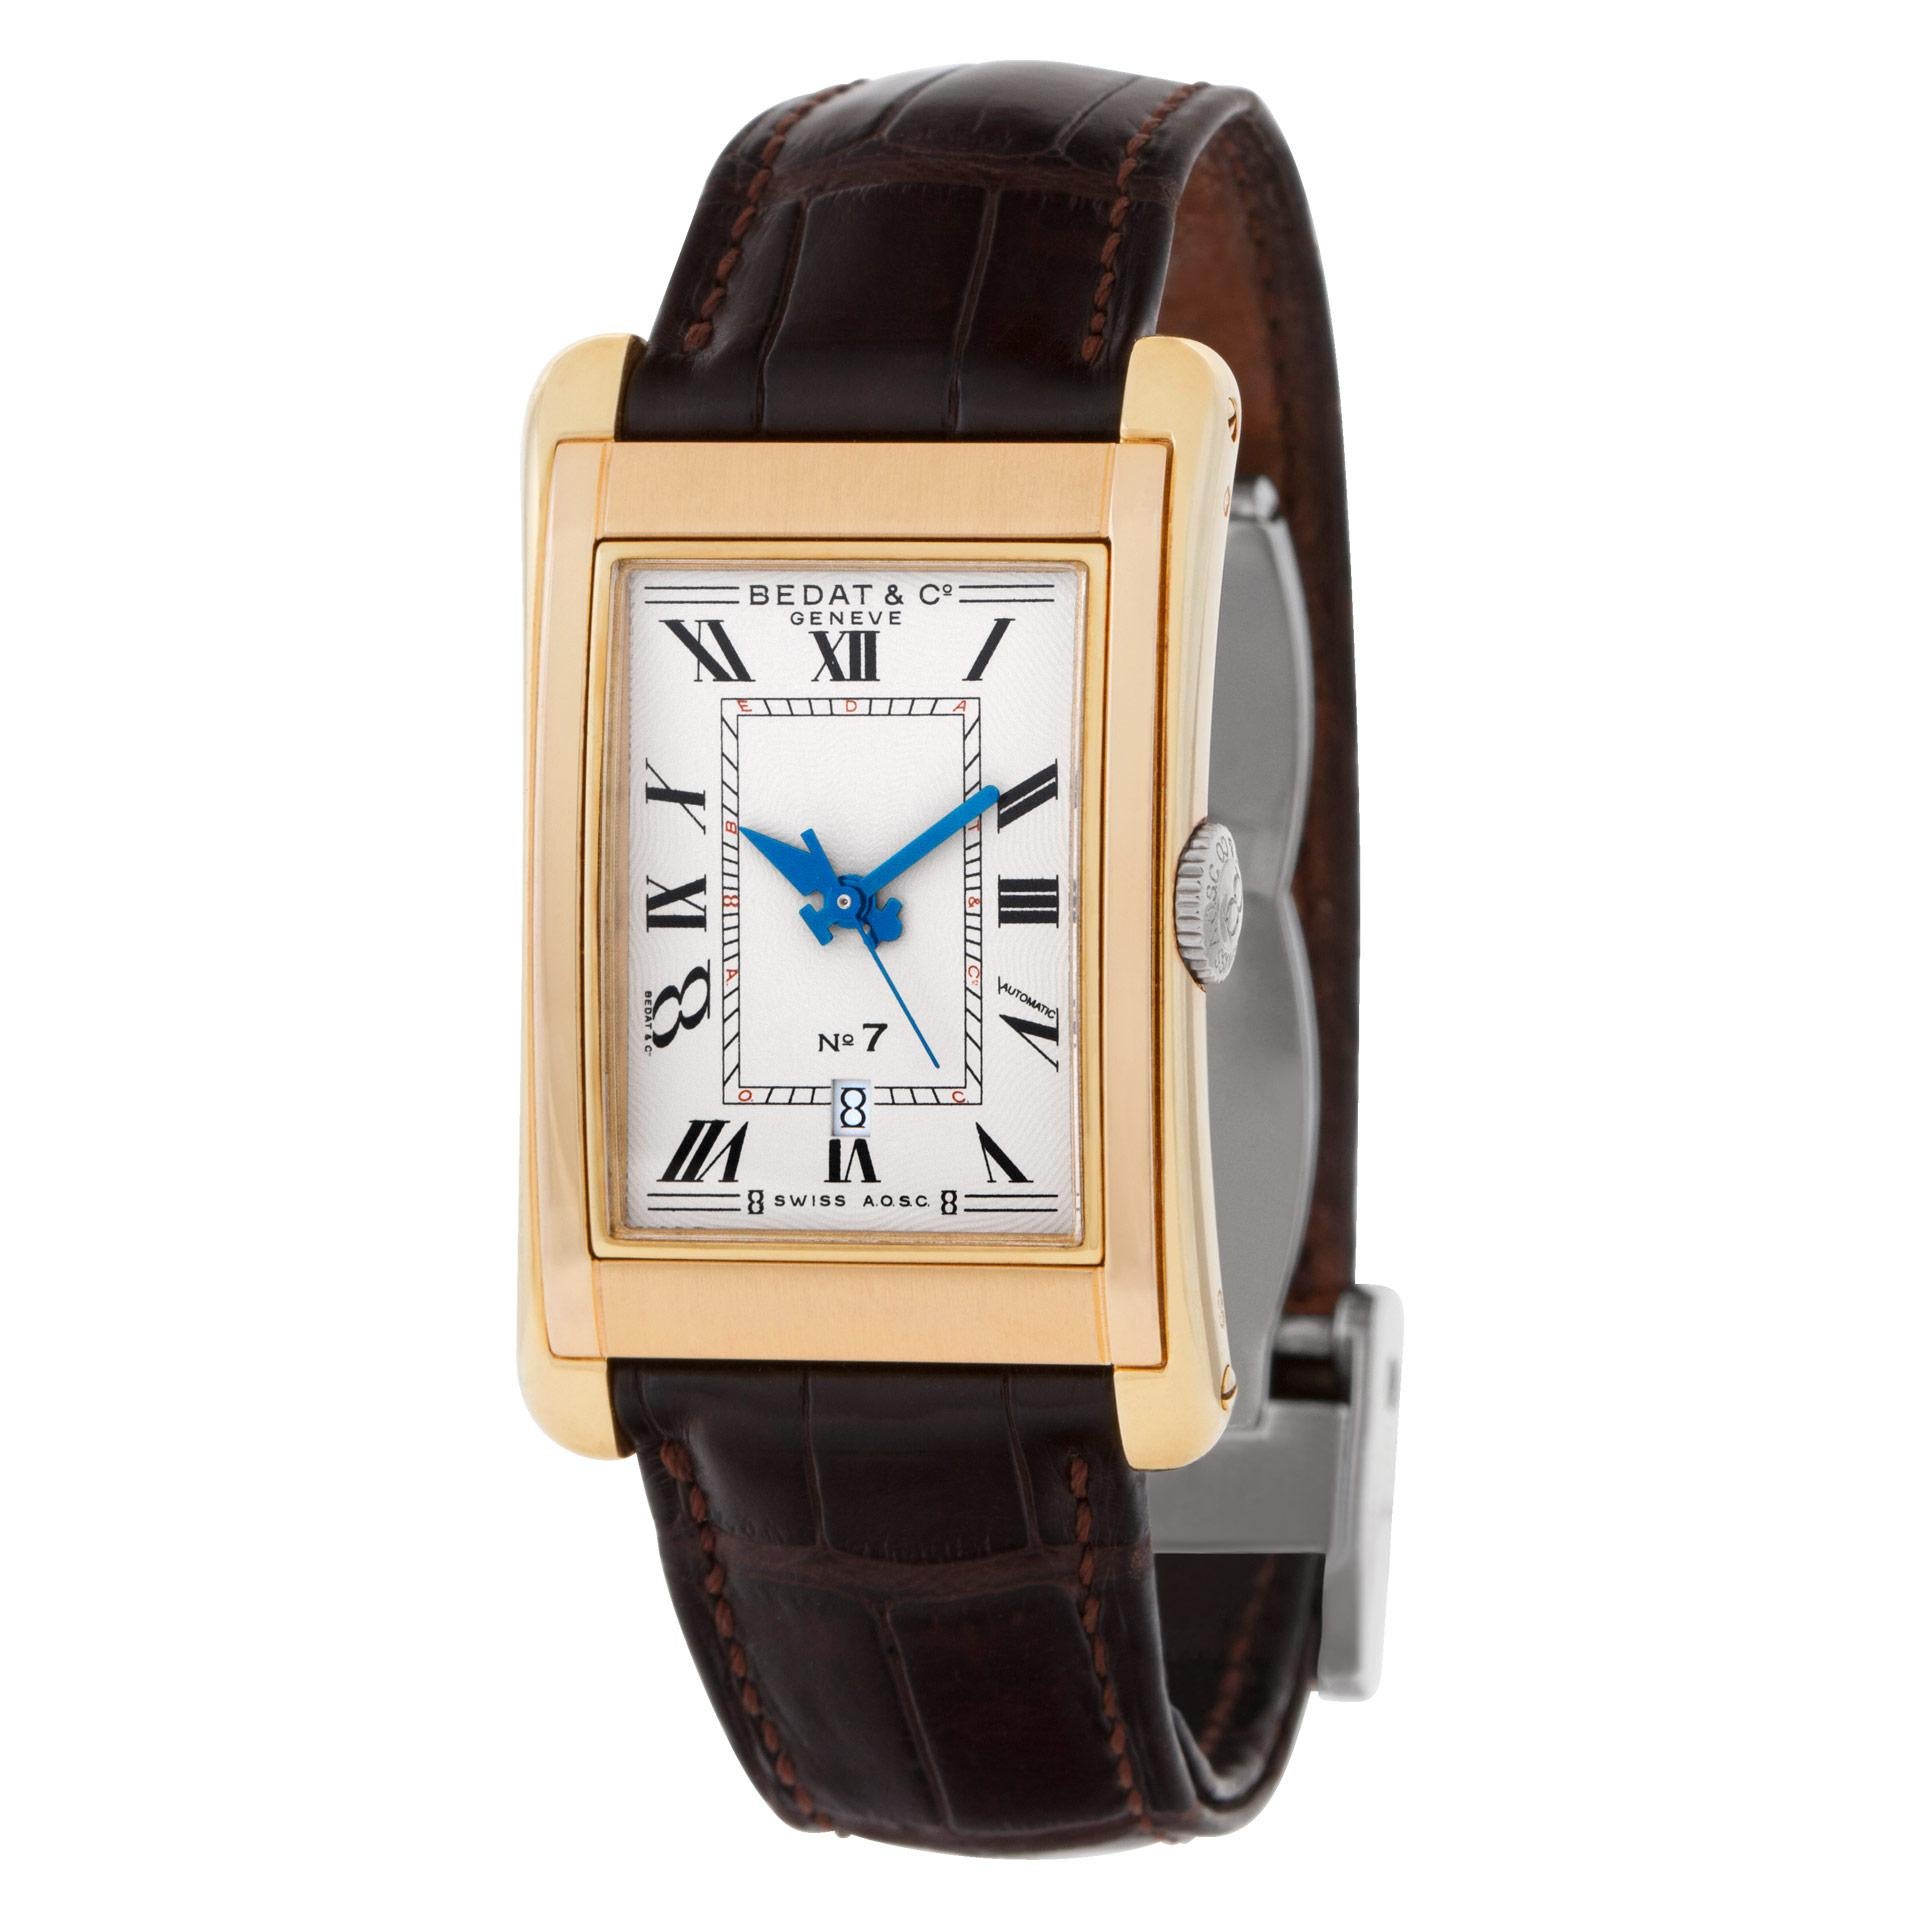 Bedat & Co. NO 7 in 18k tricolor white, yellow and rose gold on leather strap. Auto w/ sweep seconds and date. 25.5 mm case size. With box and papers. Ref 718. Fine Pre-owned Bedat & Co. Watch.   Certified preowned Classic Bedat & Co. NO 7 718 watch